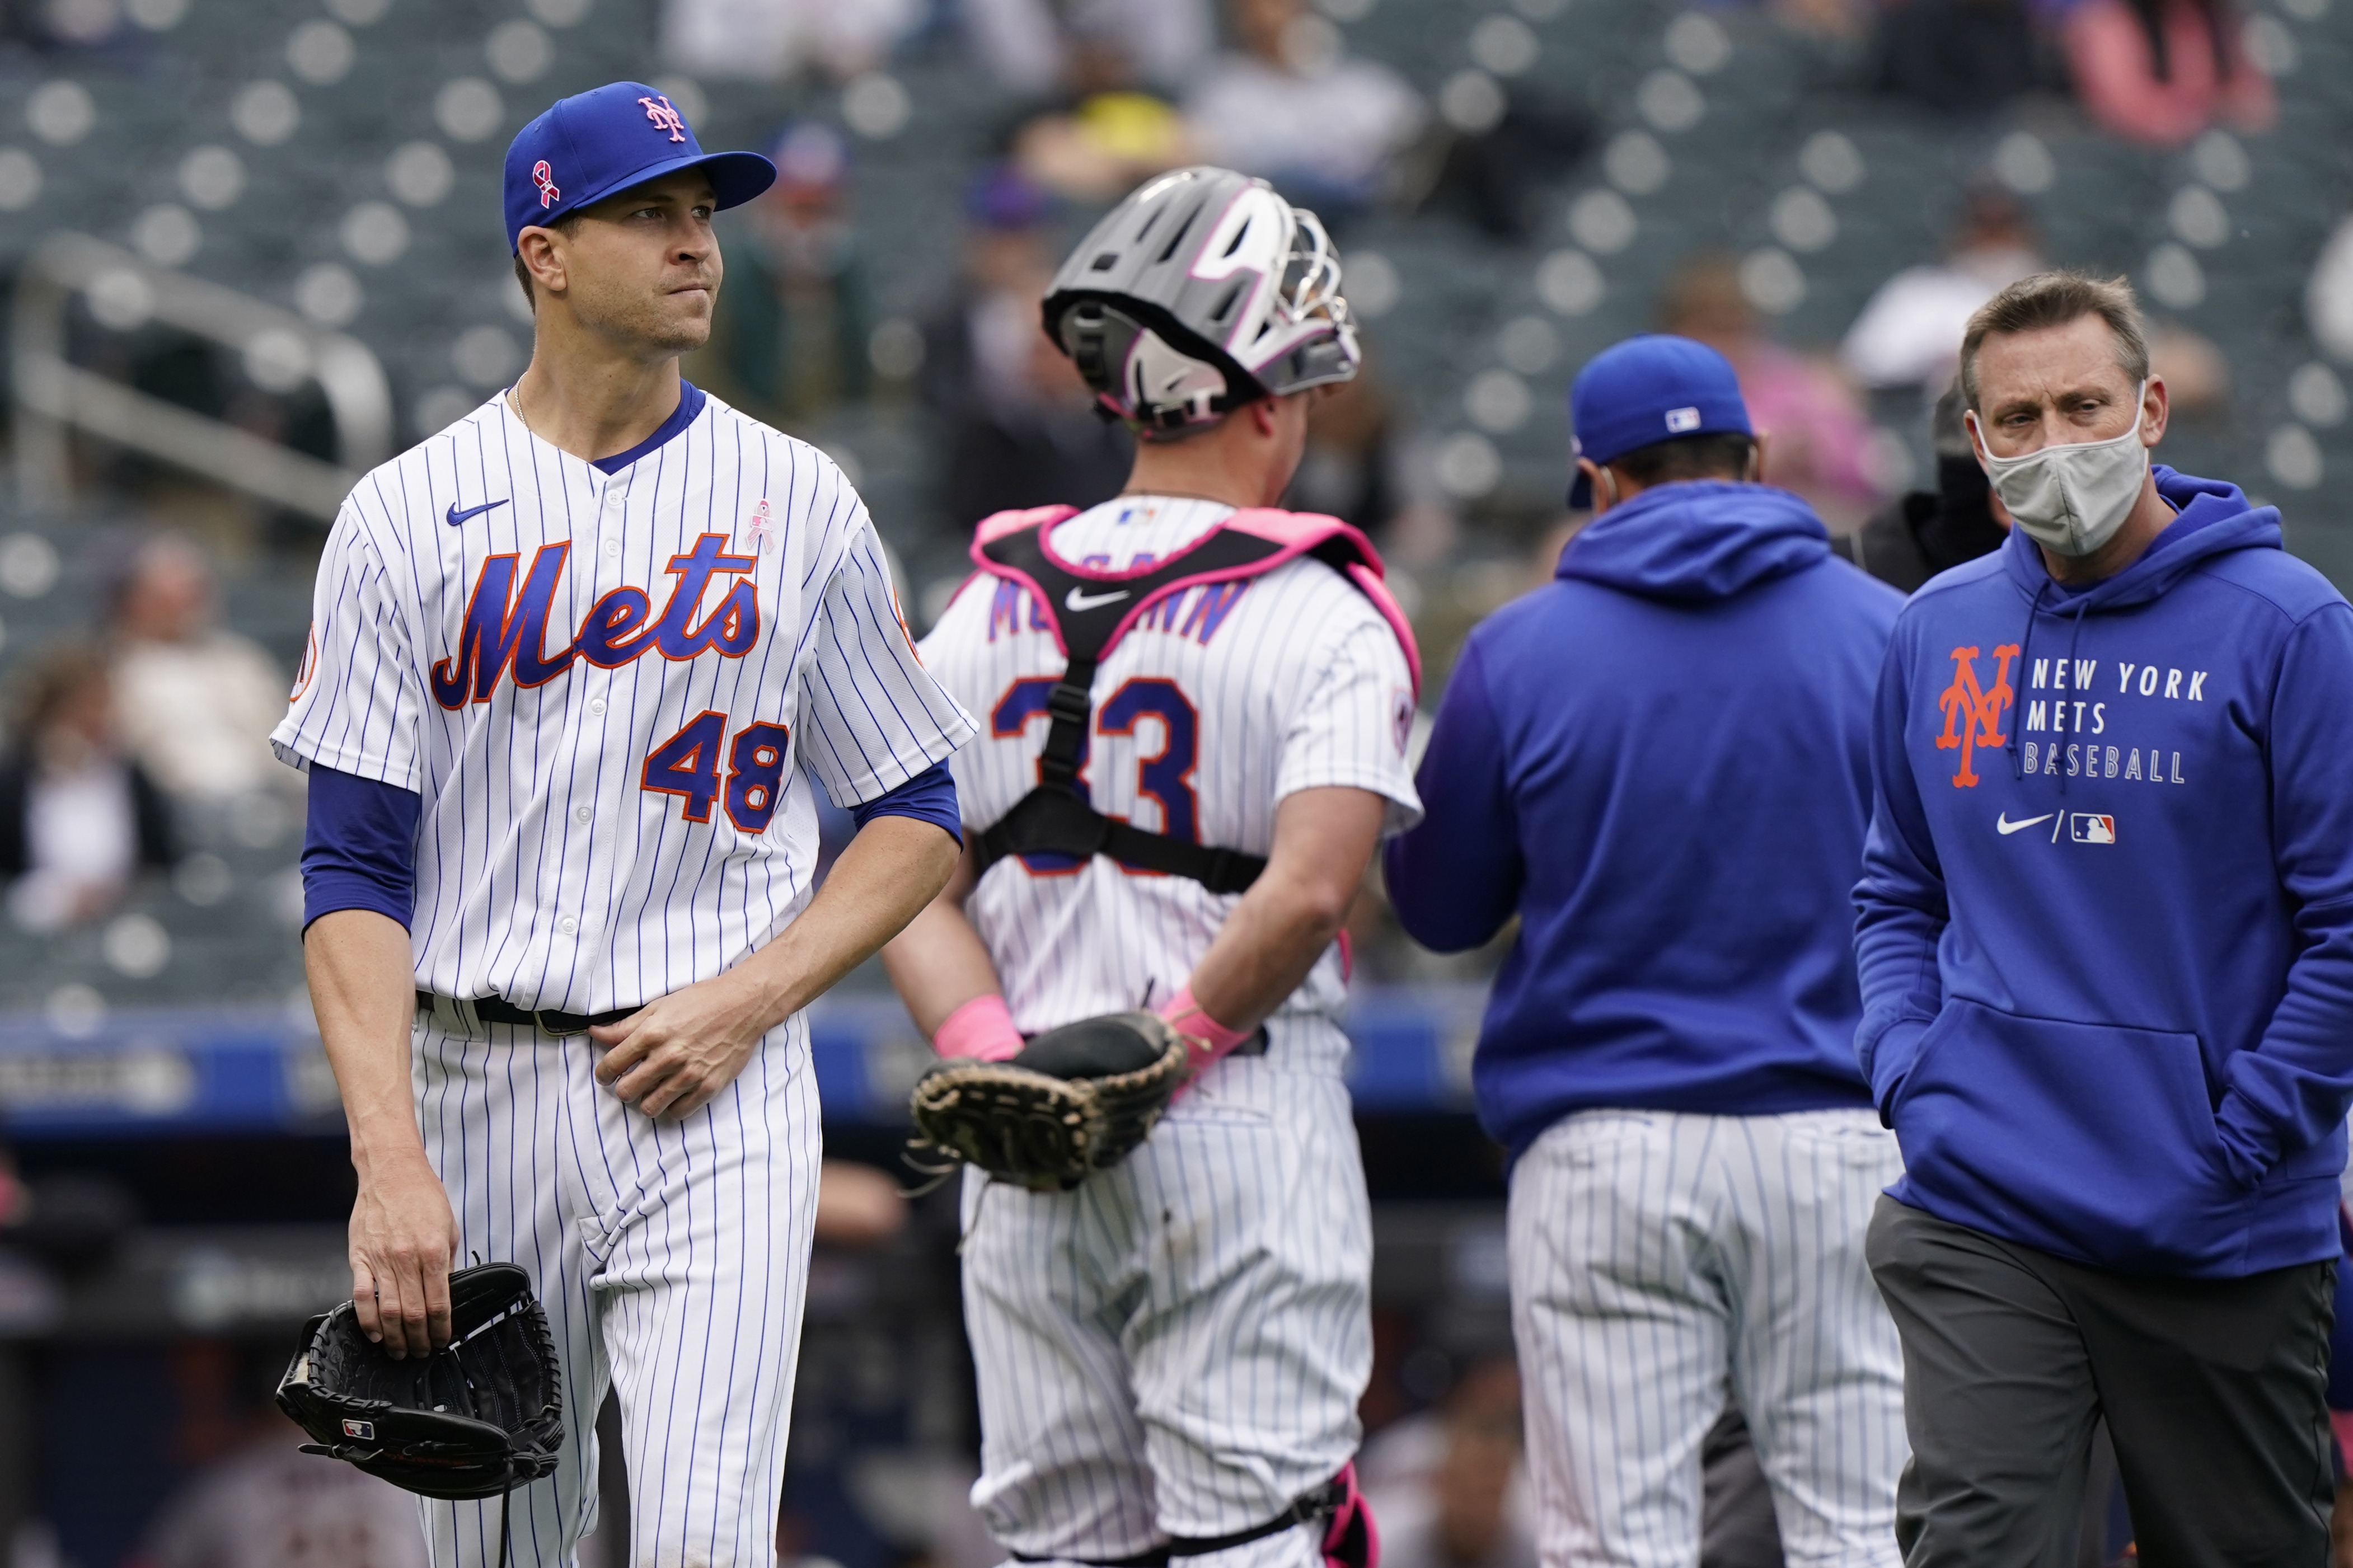 New York Mets ace Jacob deGrom pitches 4 innings in potential